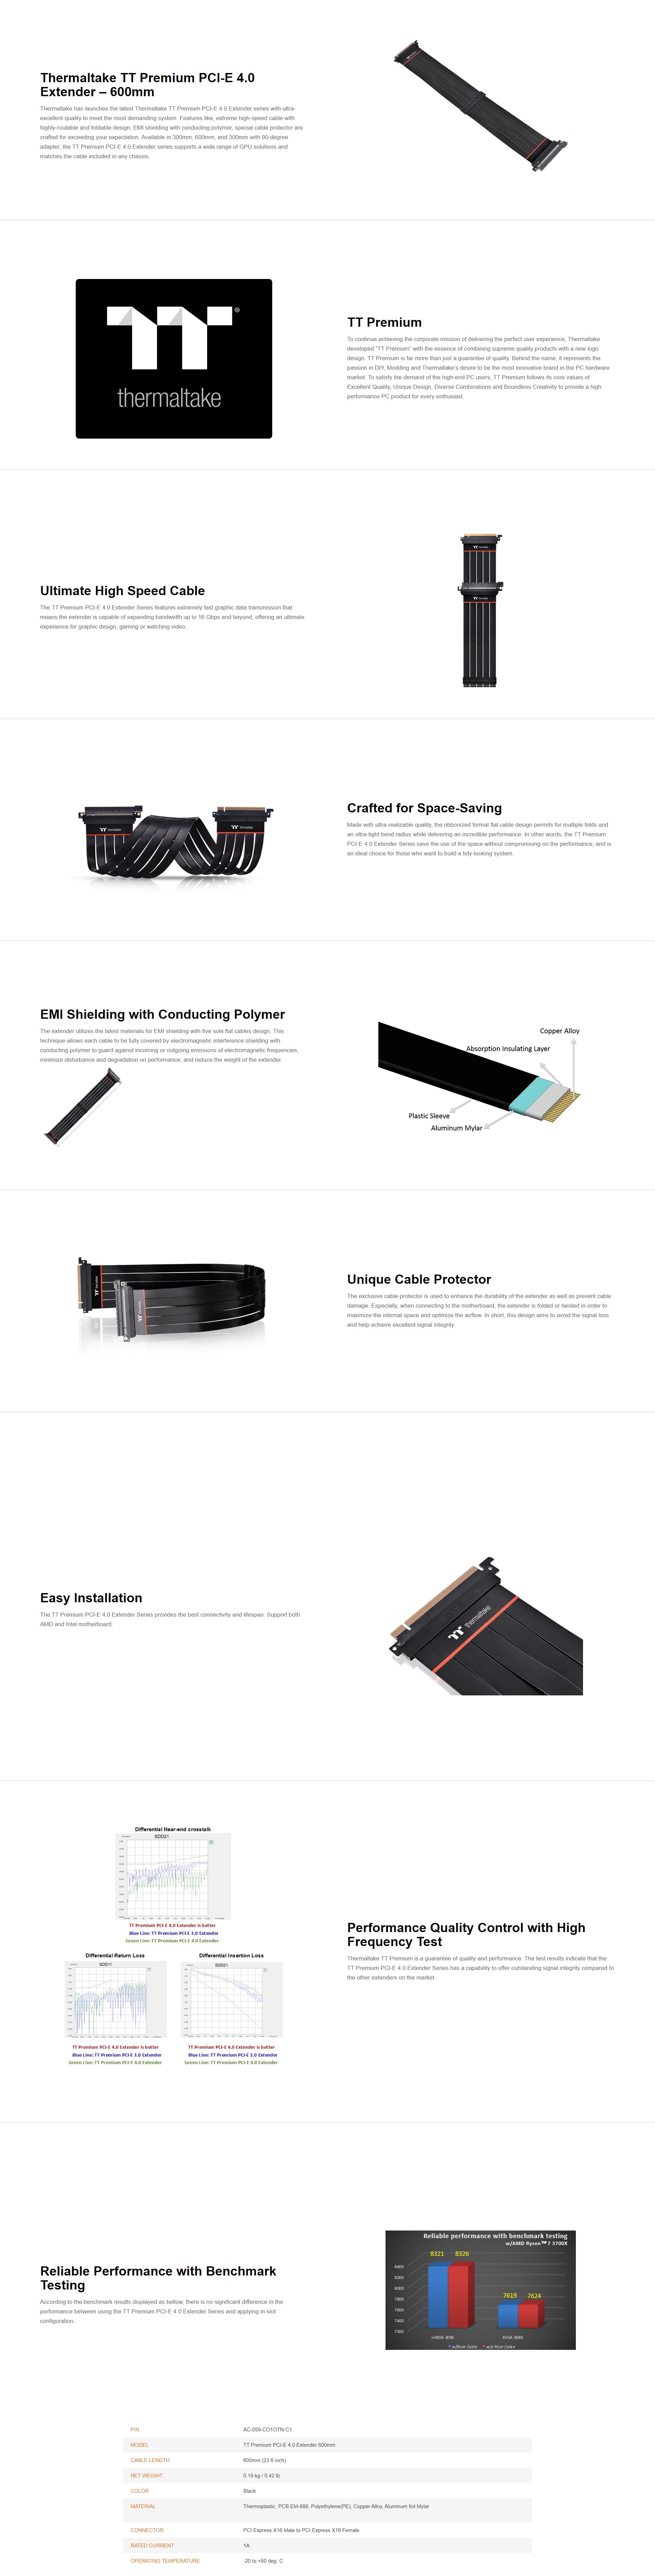 A large marketing image providing additional information about the product Thermaltake PCIe 4.0 16X Riser Cable - 600mm - Additional alt info not provided